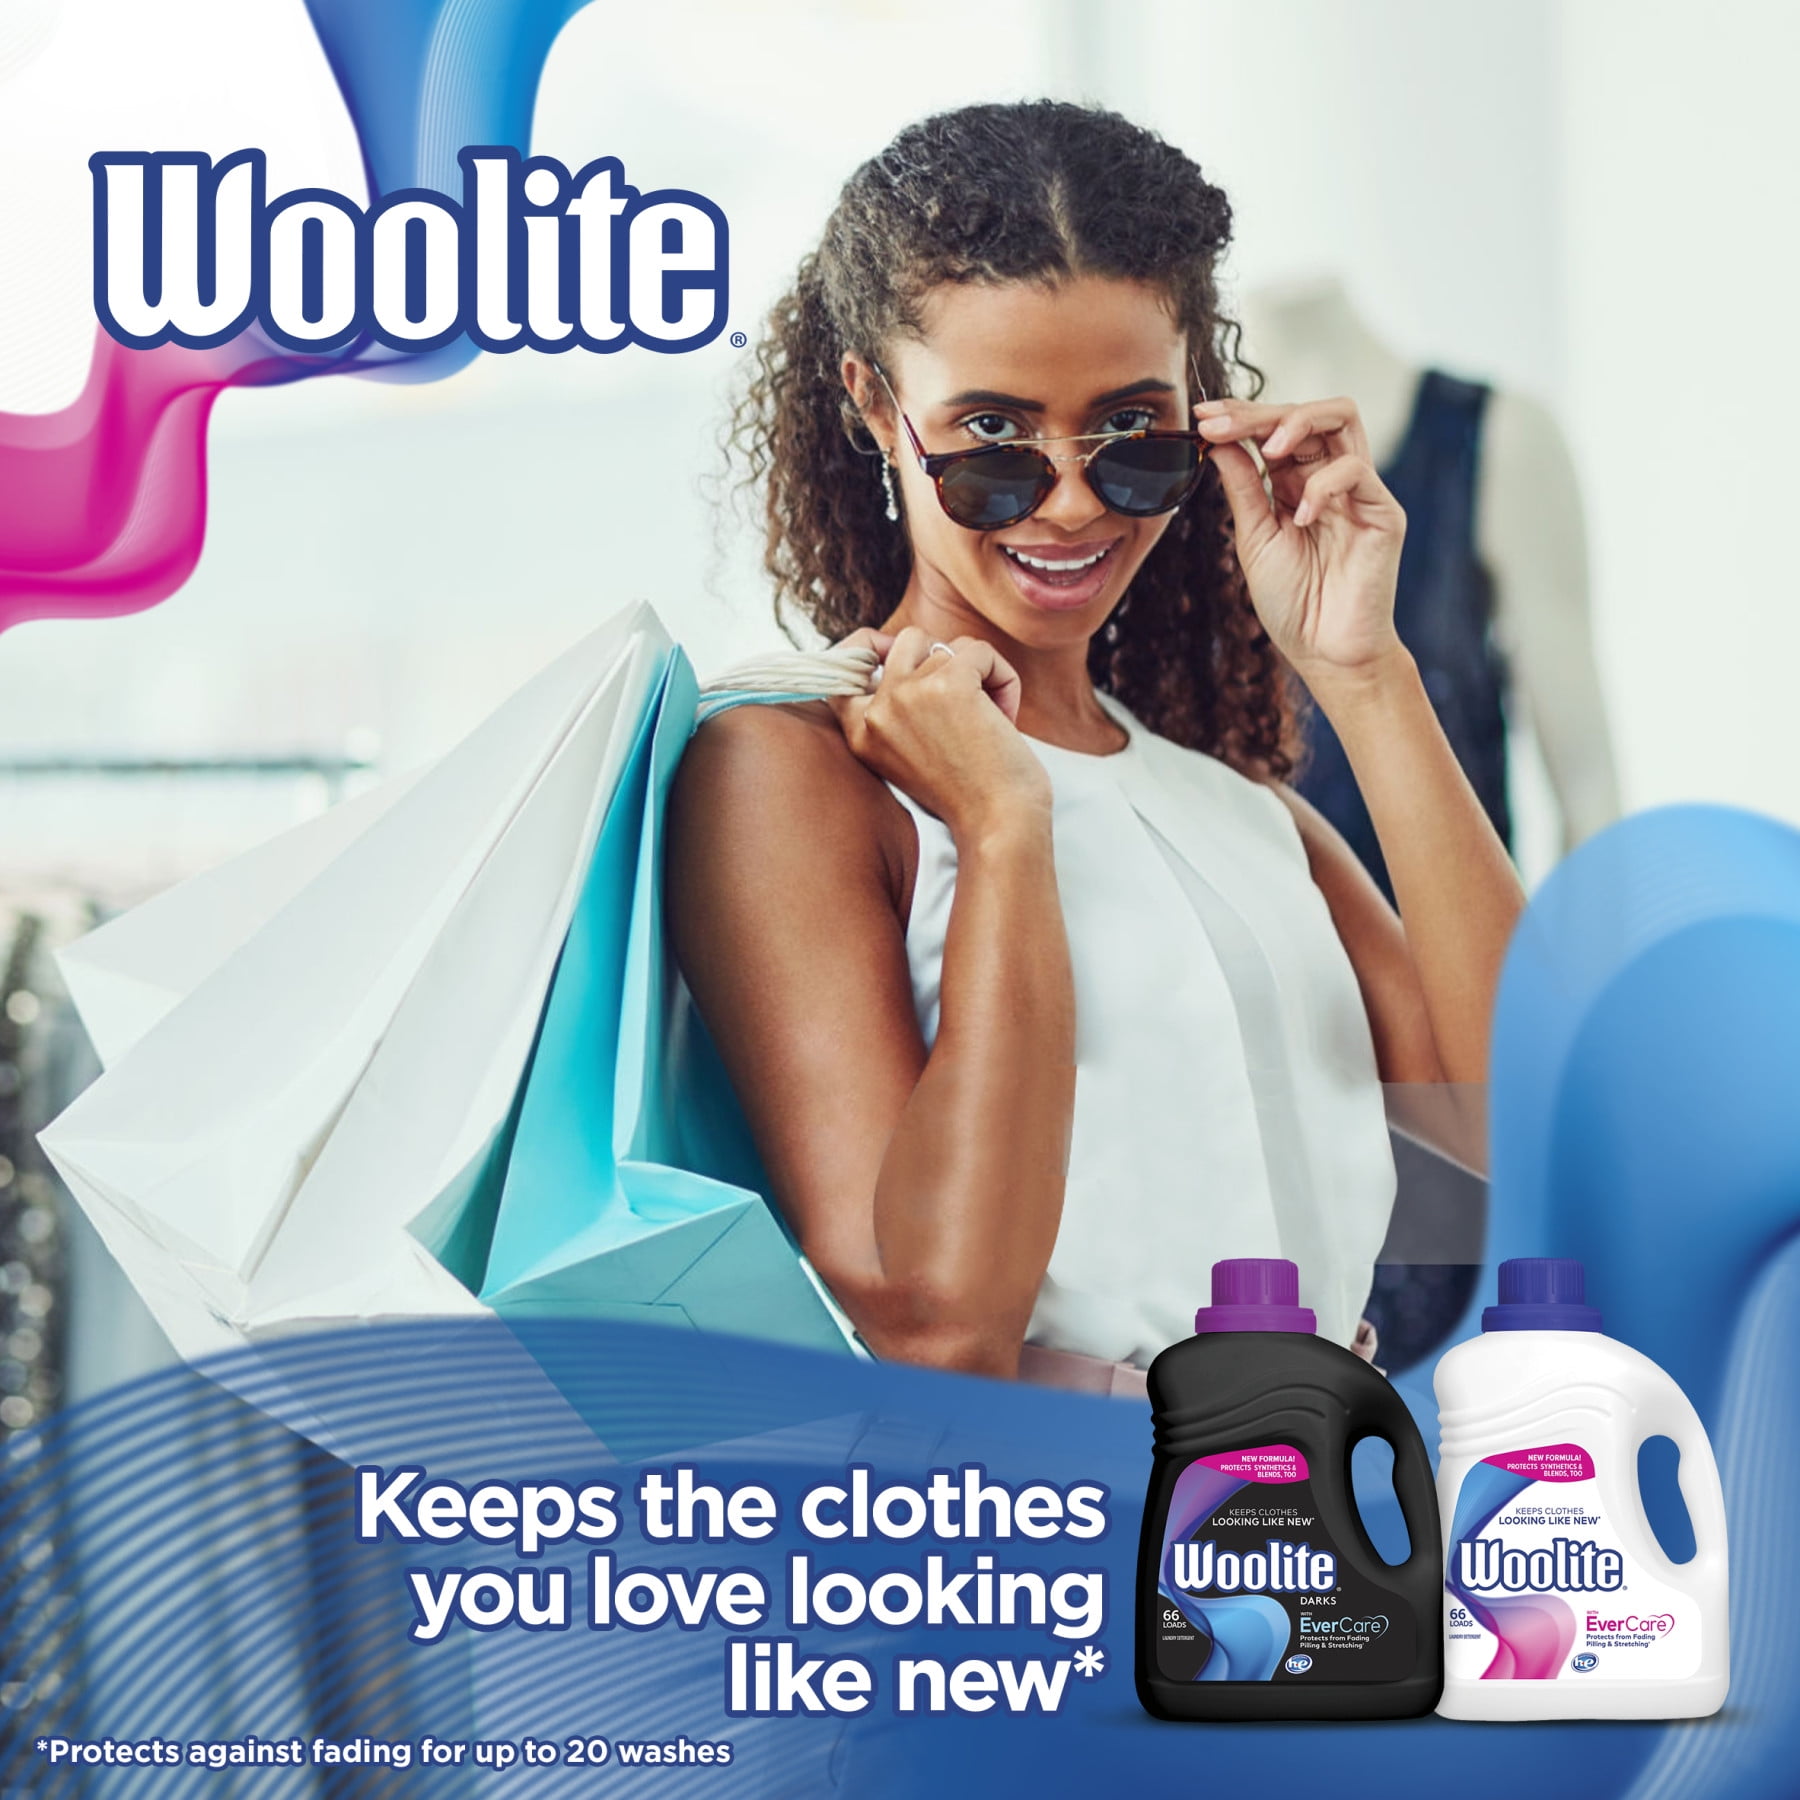 Woolite Clean HE Laundry Detergent (75-oz) at